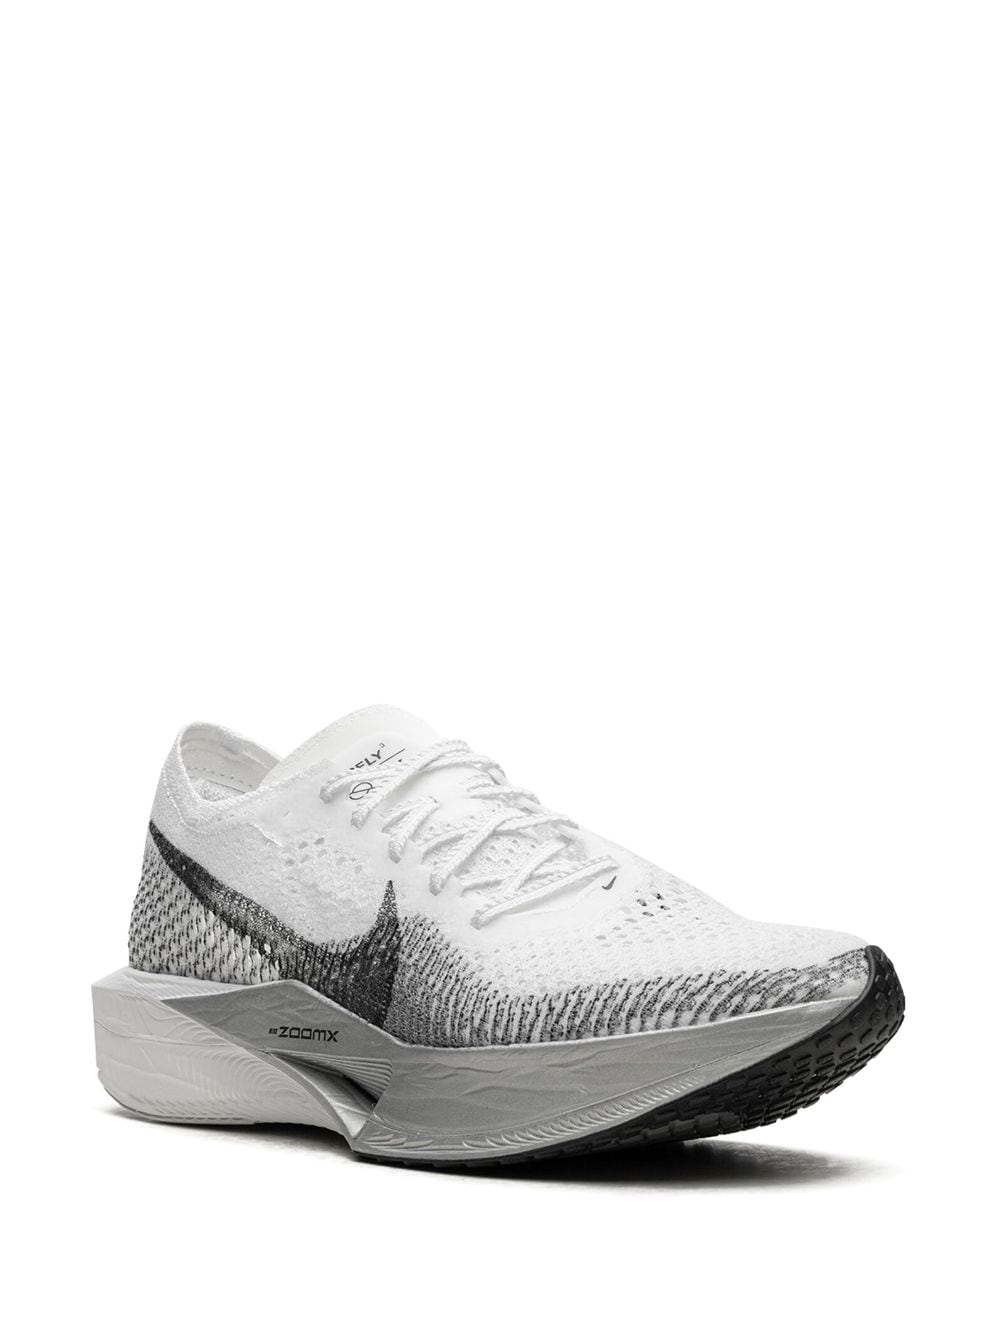 Shop Nike Zoomx Vaporfly 3 "white Particle Grey" Sneakers